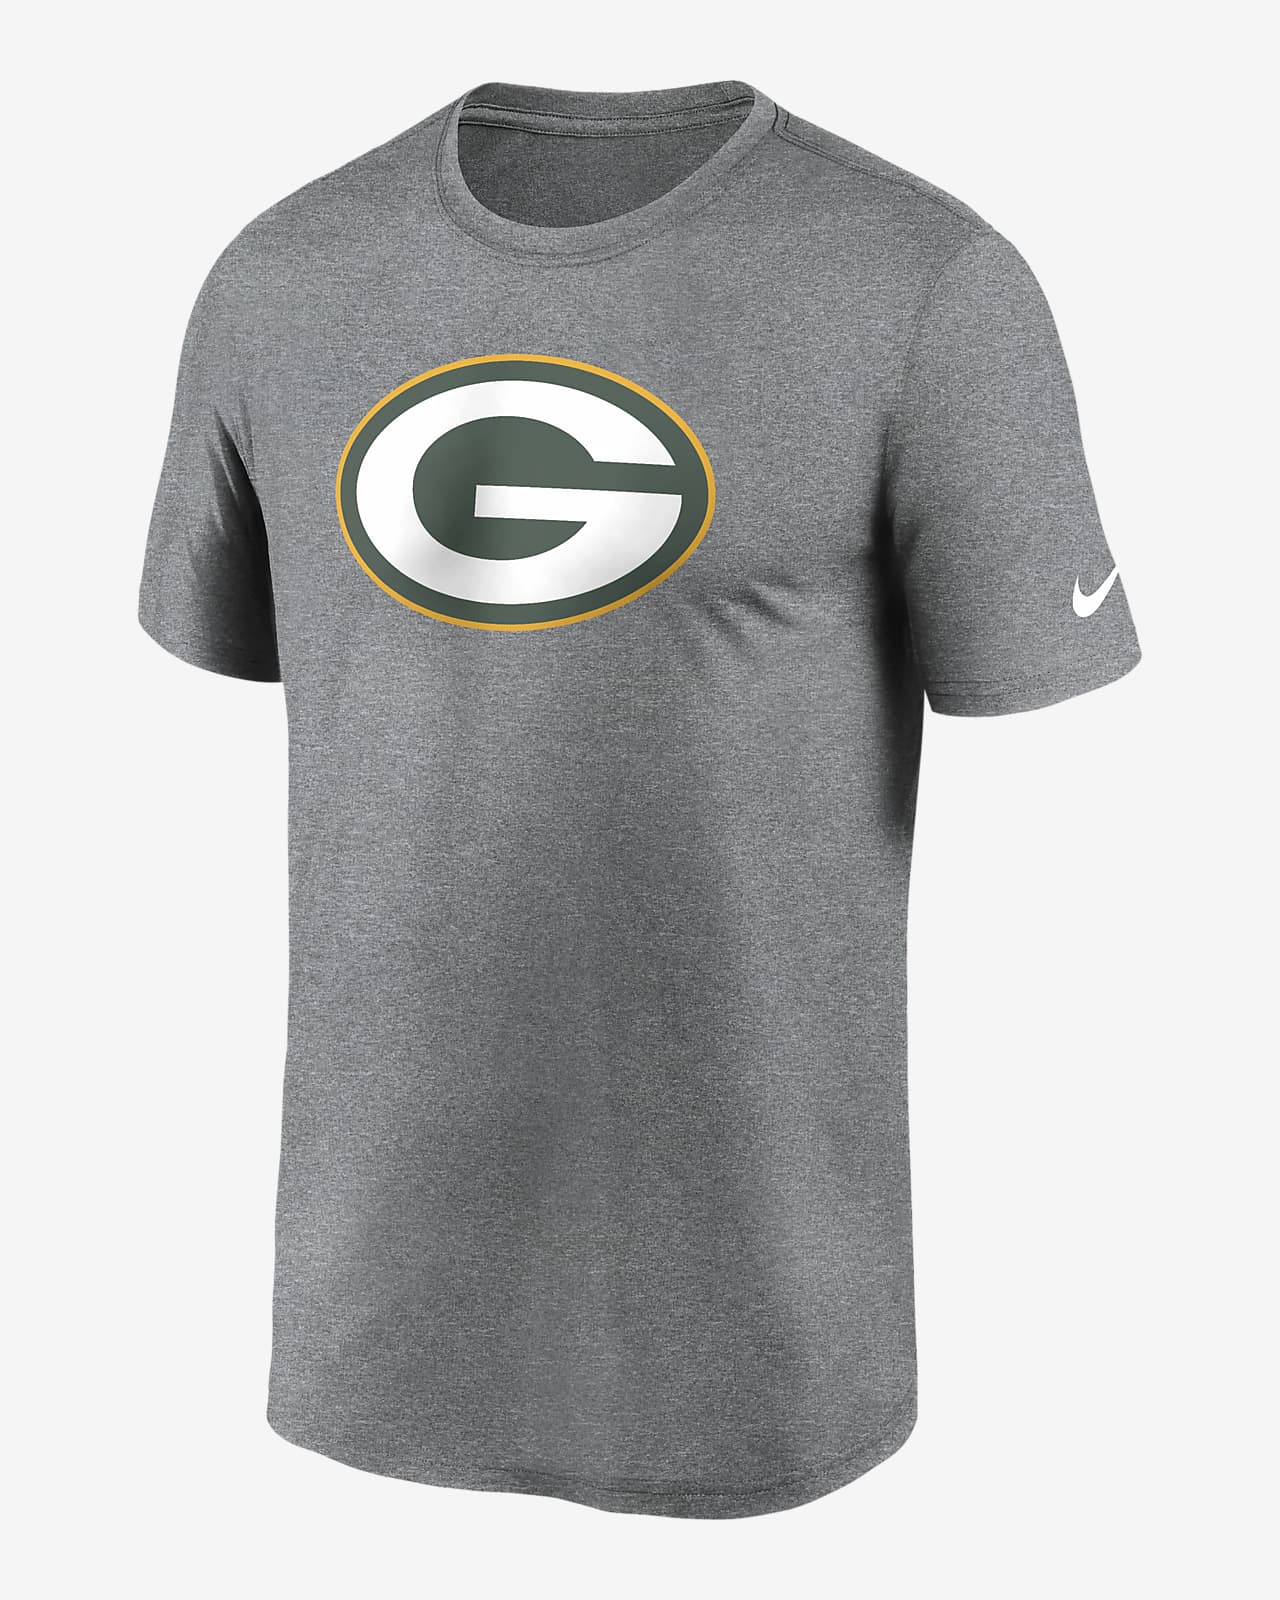 nfl packers shirts